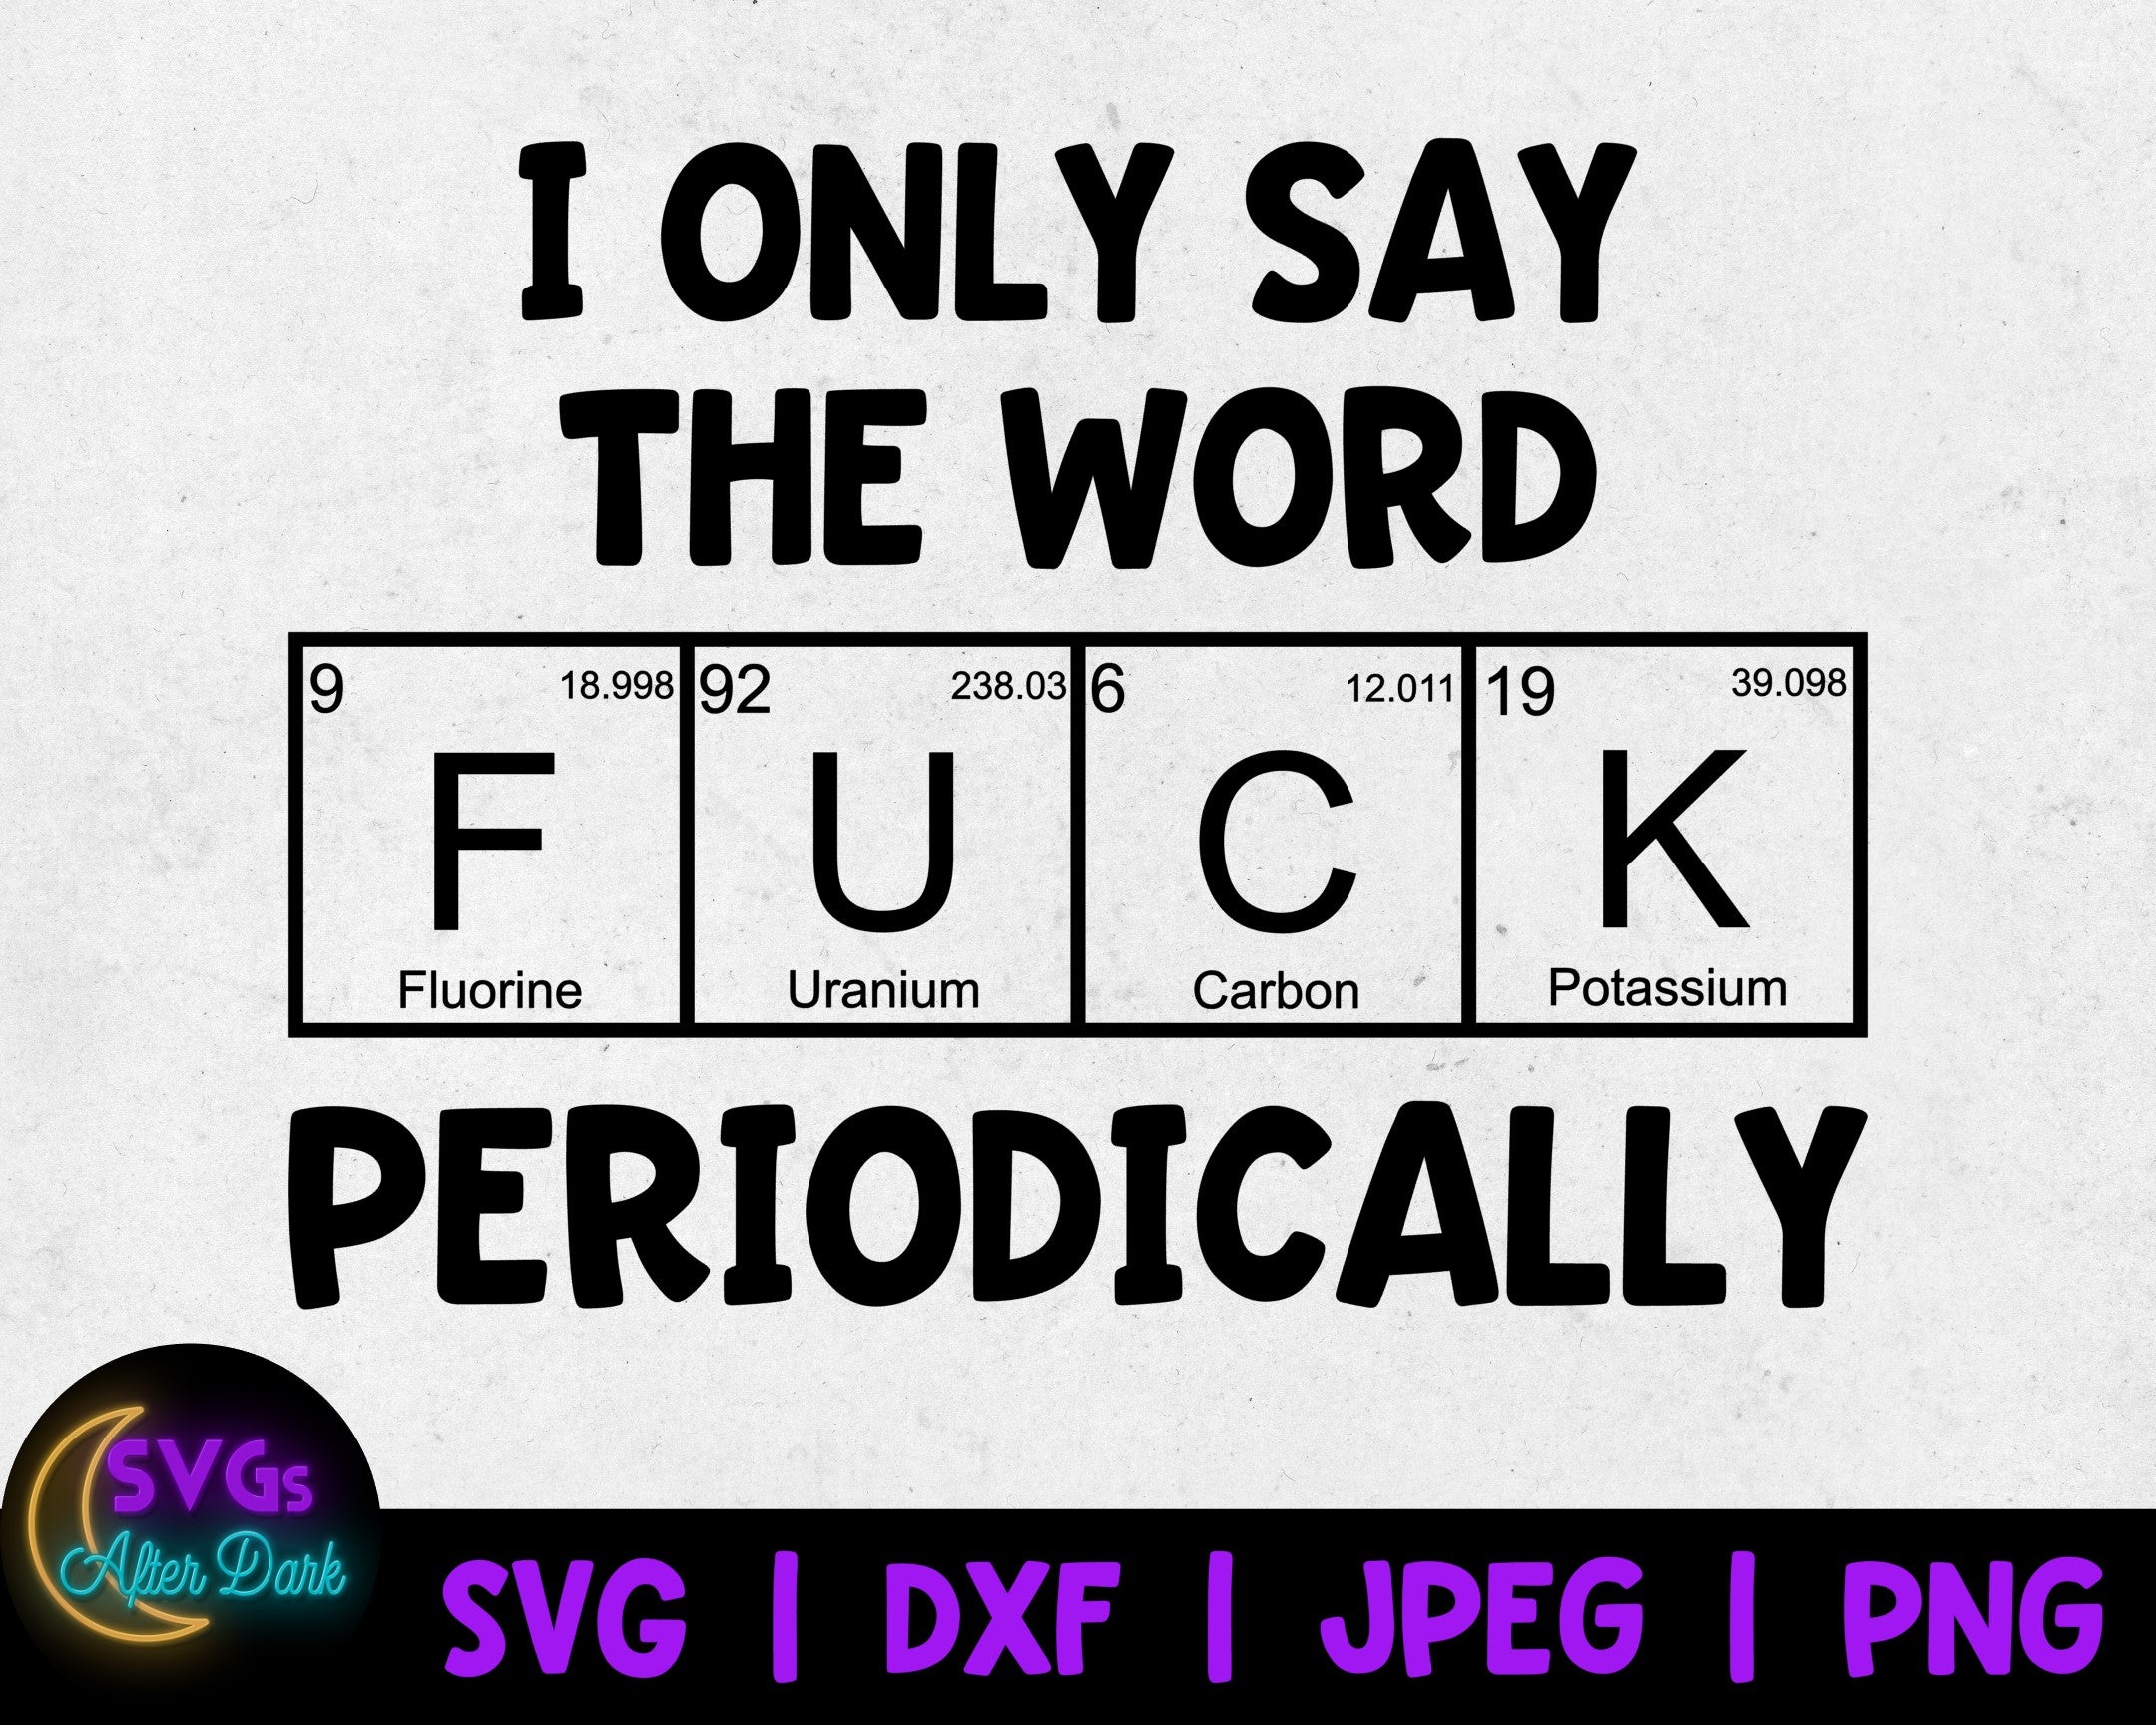 NSFW SVG - Only Say the Word Fuck Periodically SVG - Nerdy Svg - Adult Humor Svg - Fuck Svg